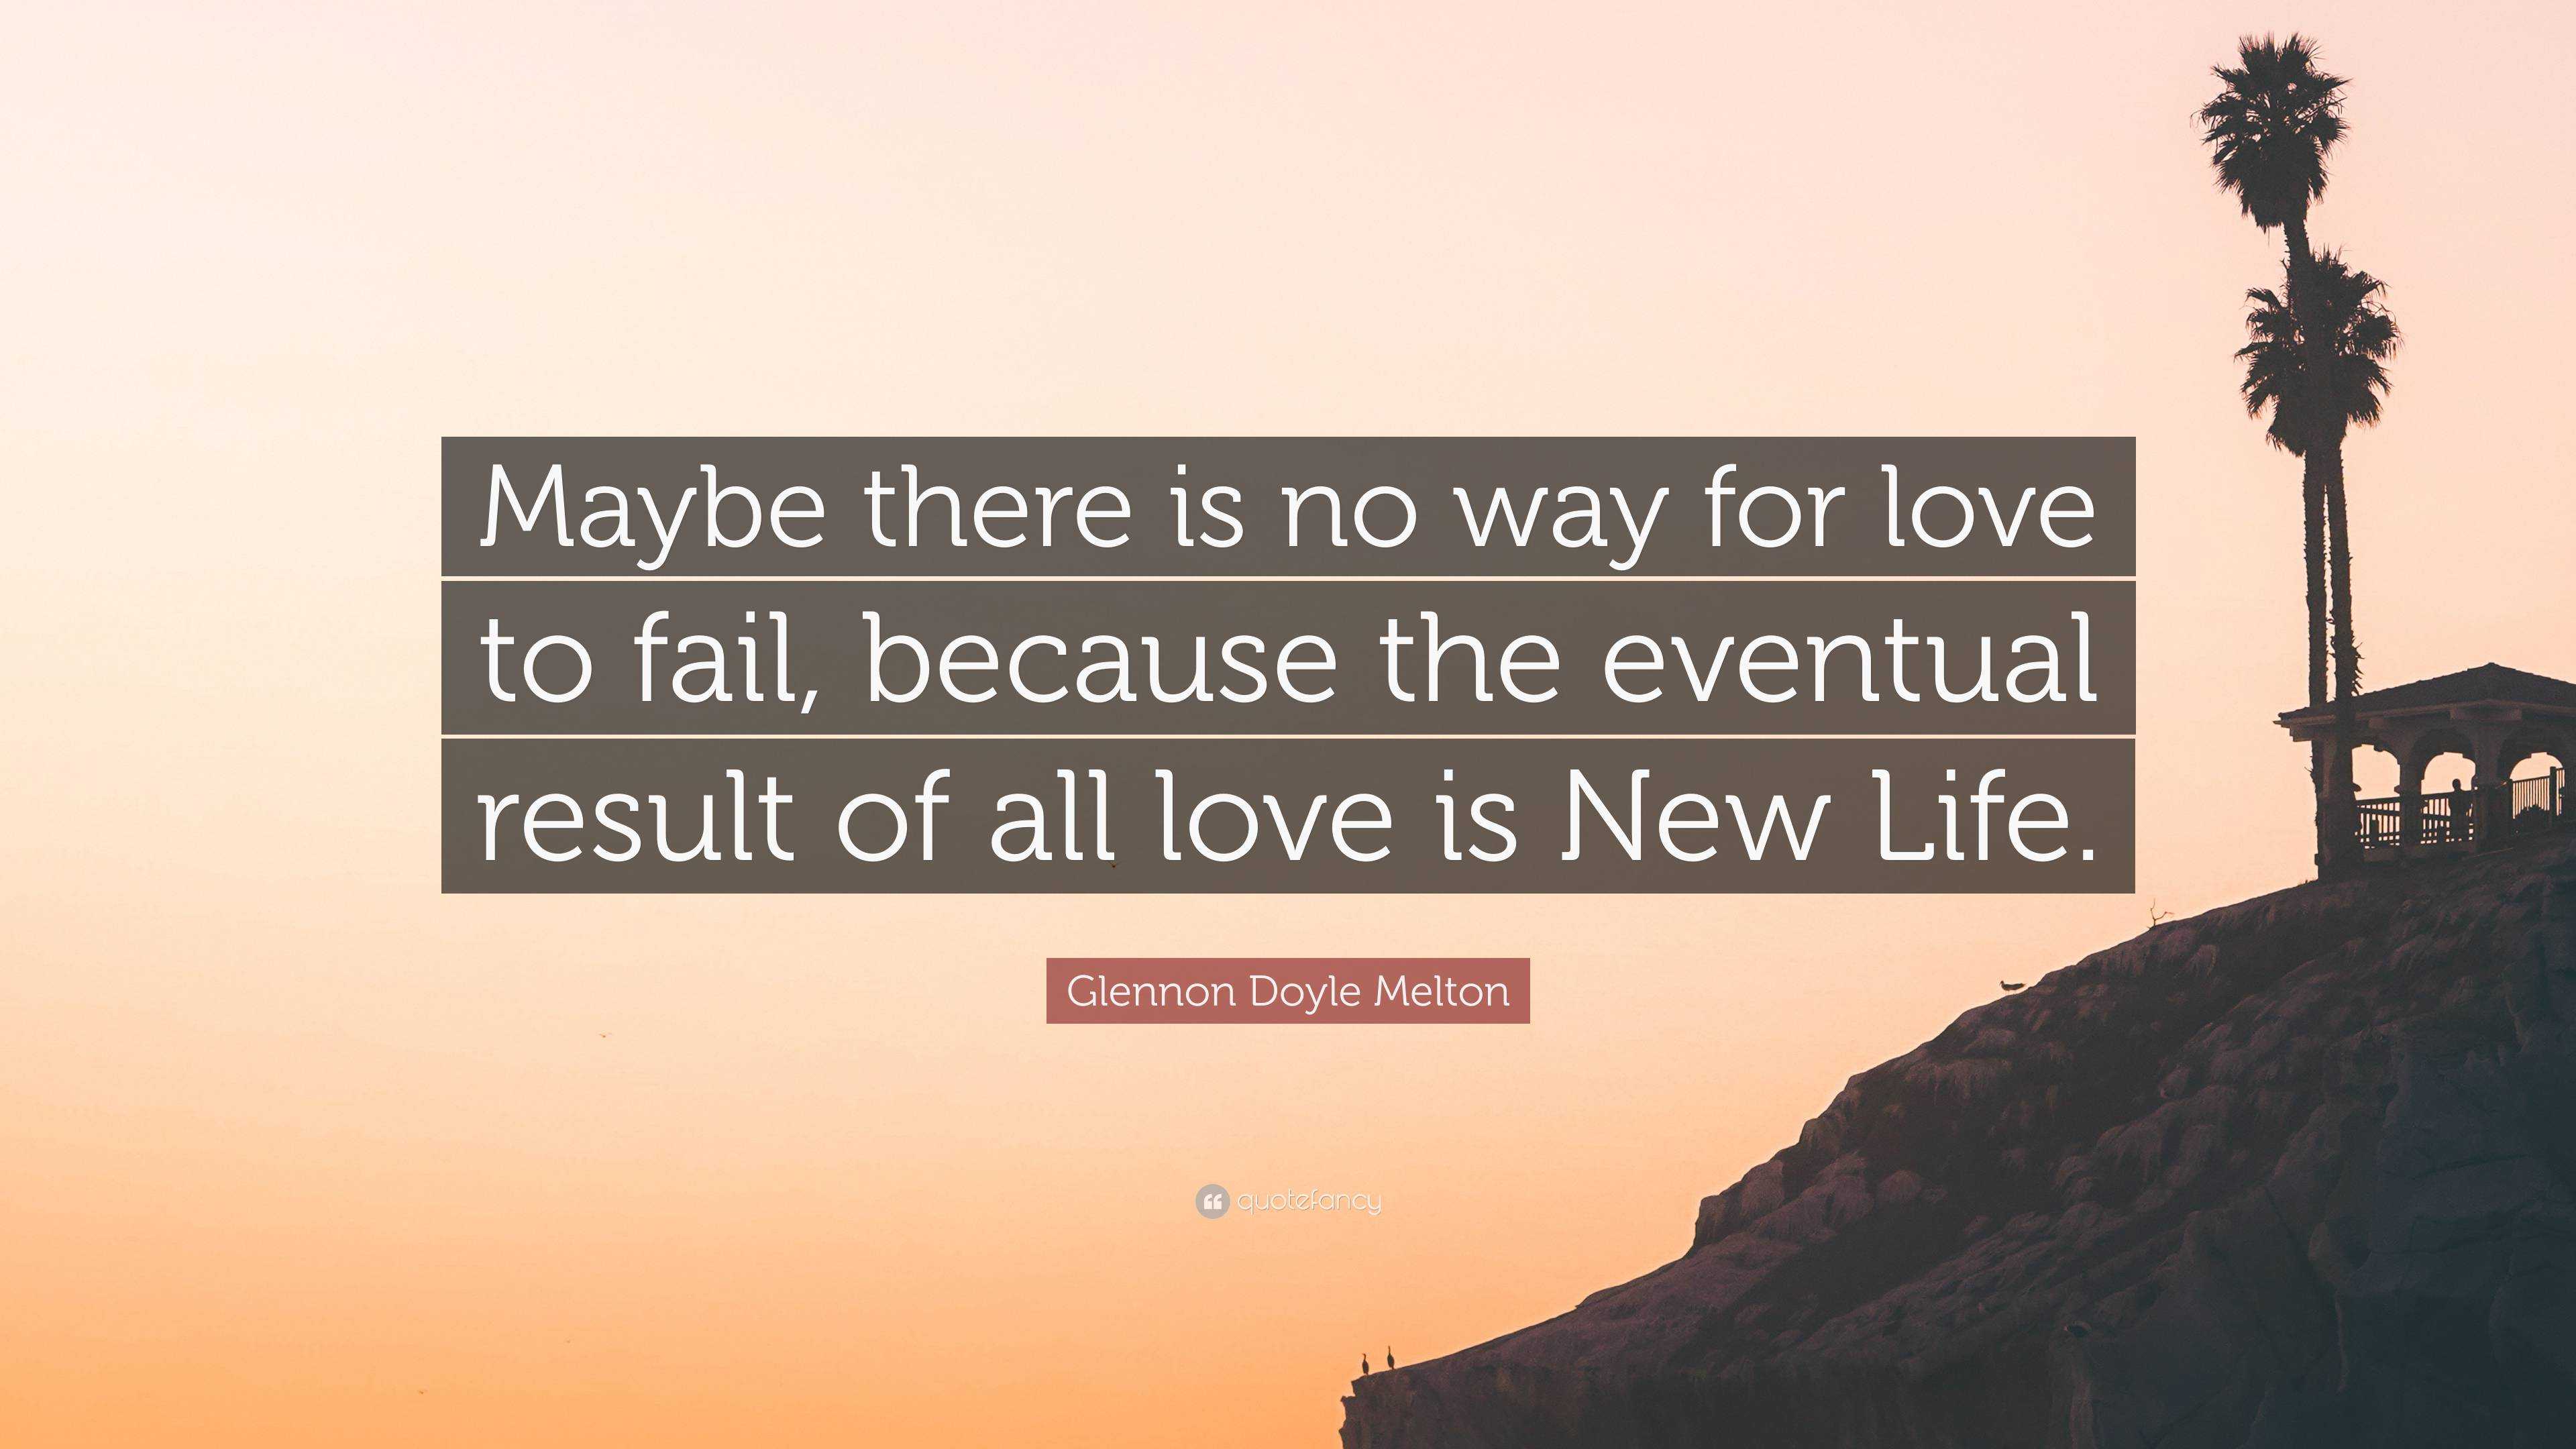 Glennon Doyle Melton Quote: “Maybe there is no way for love to fail ...